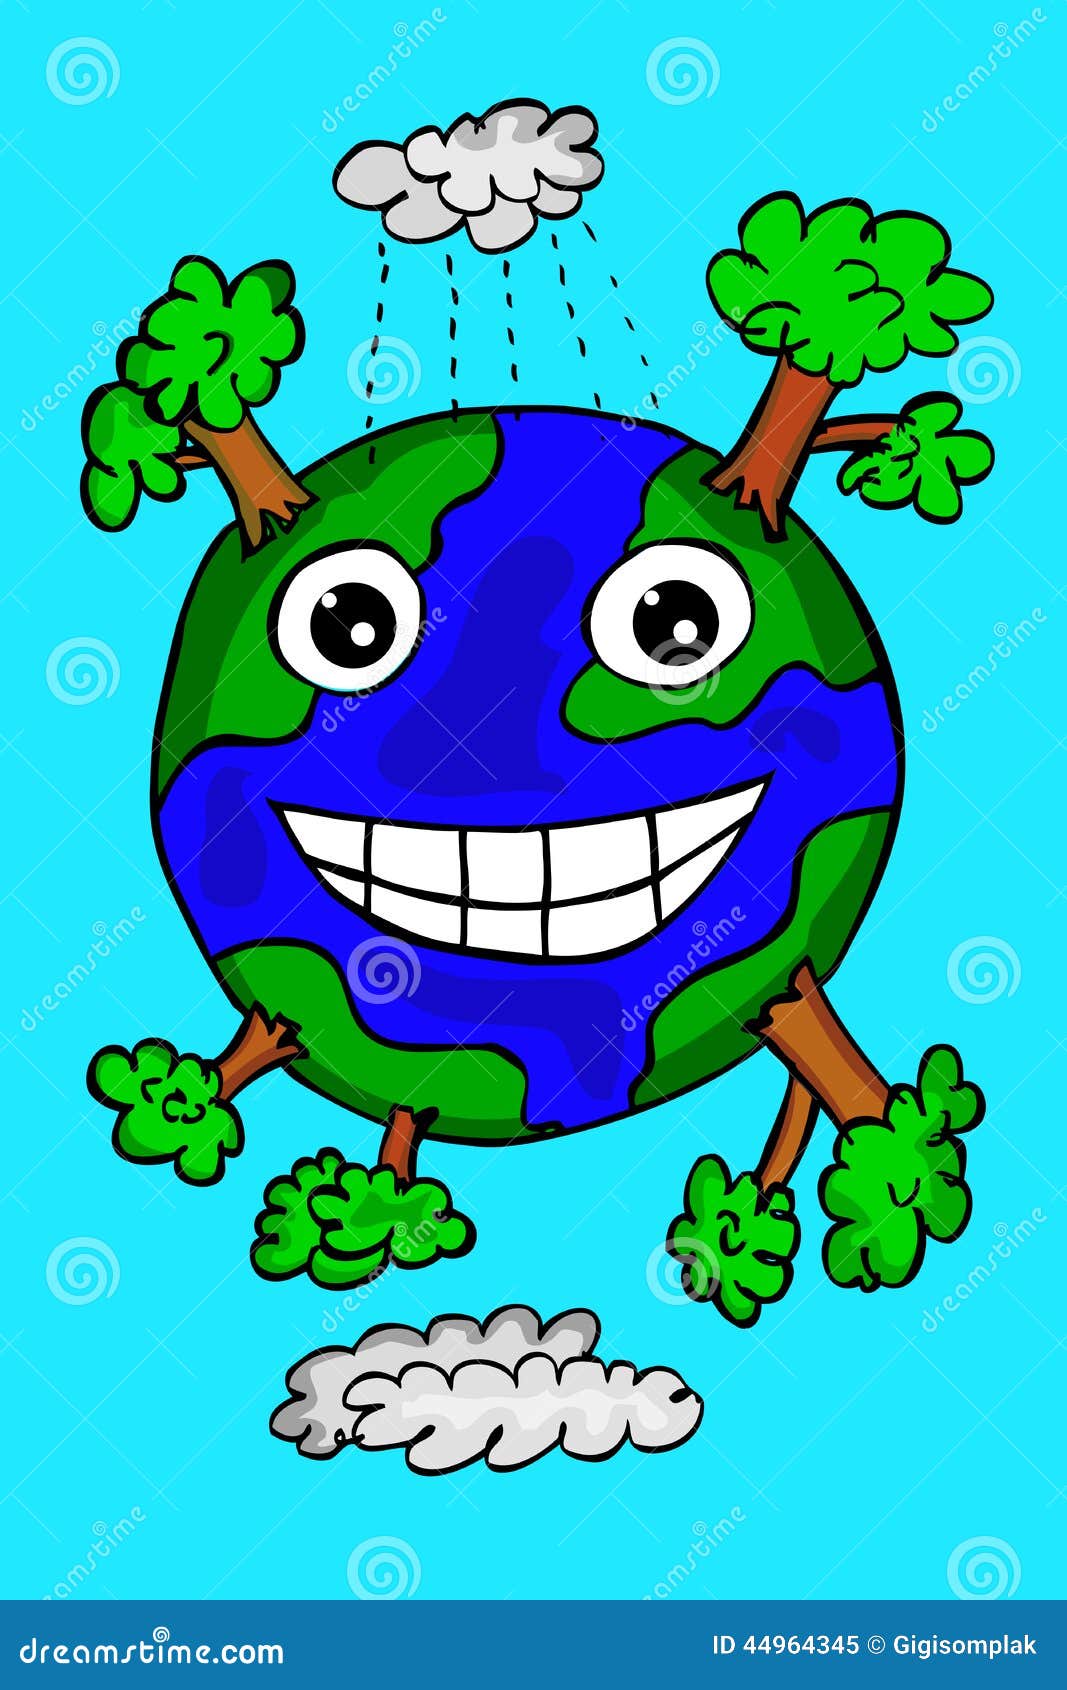 Hand Draw Sketch Of Happy Earth Stock Vector - Image: 44964345